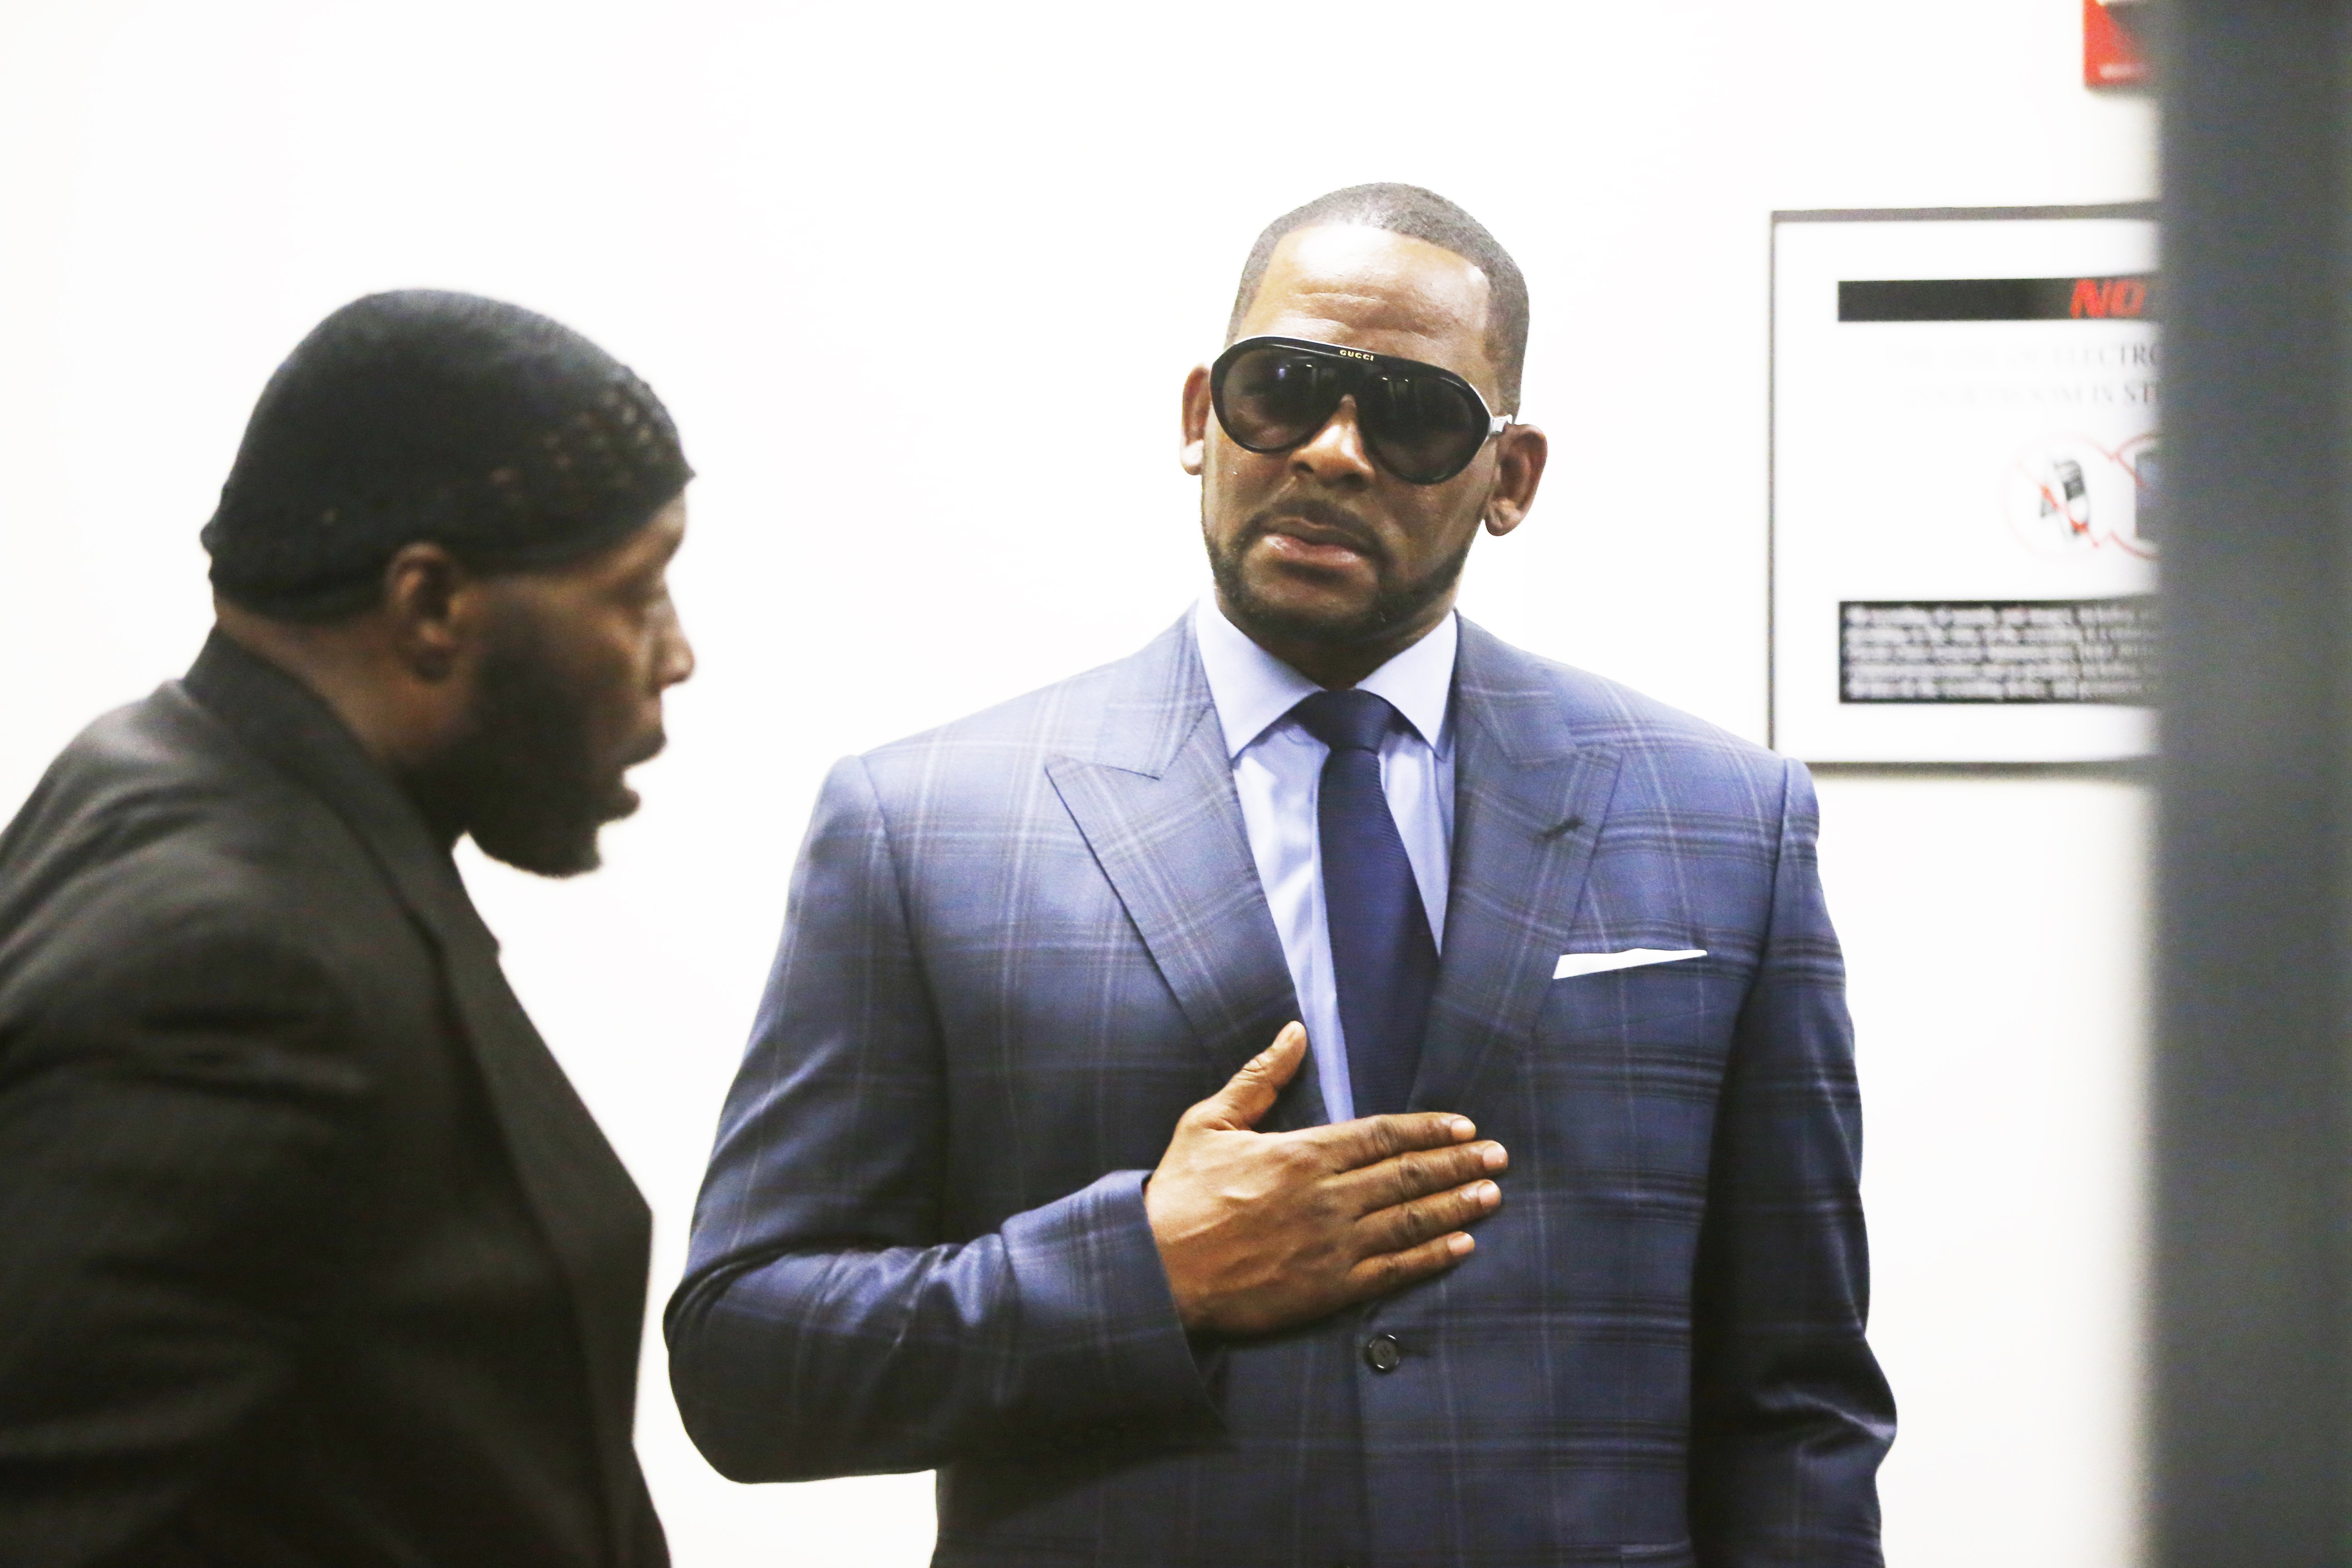 R. Kelly at the Daley Center for a child support hearing, on March 6, 2019, Chicago, Illinois. | Source: GettyImages/Global Images of Ukraine